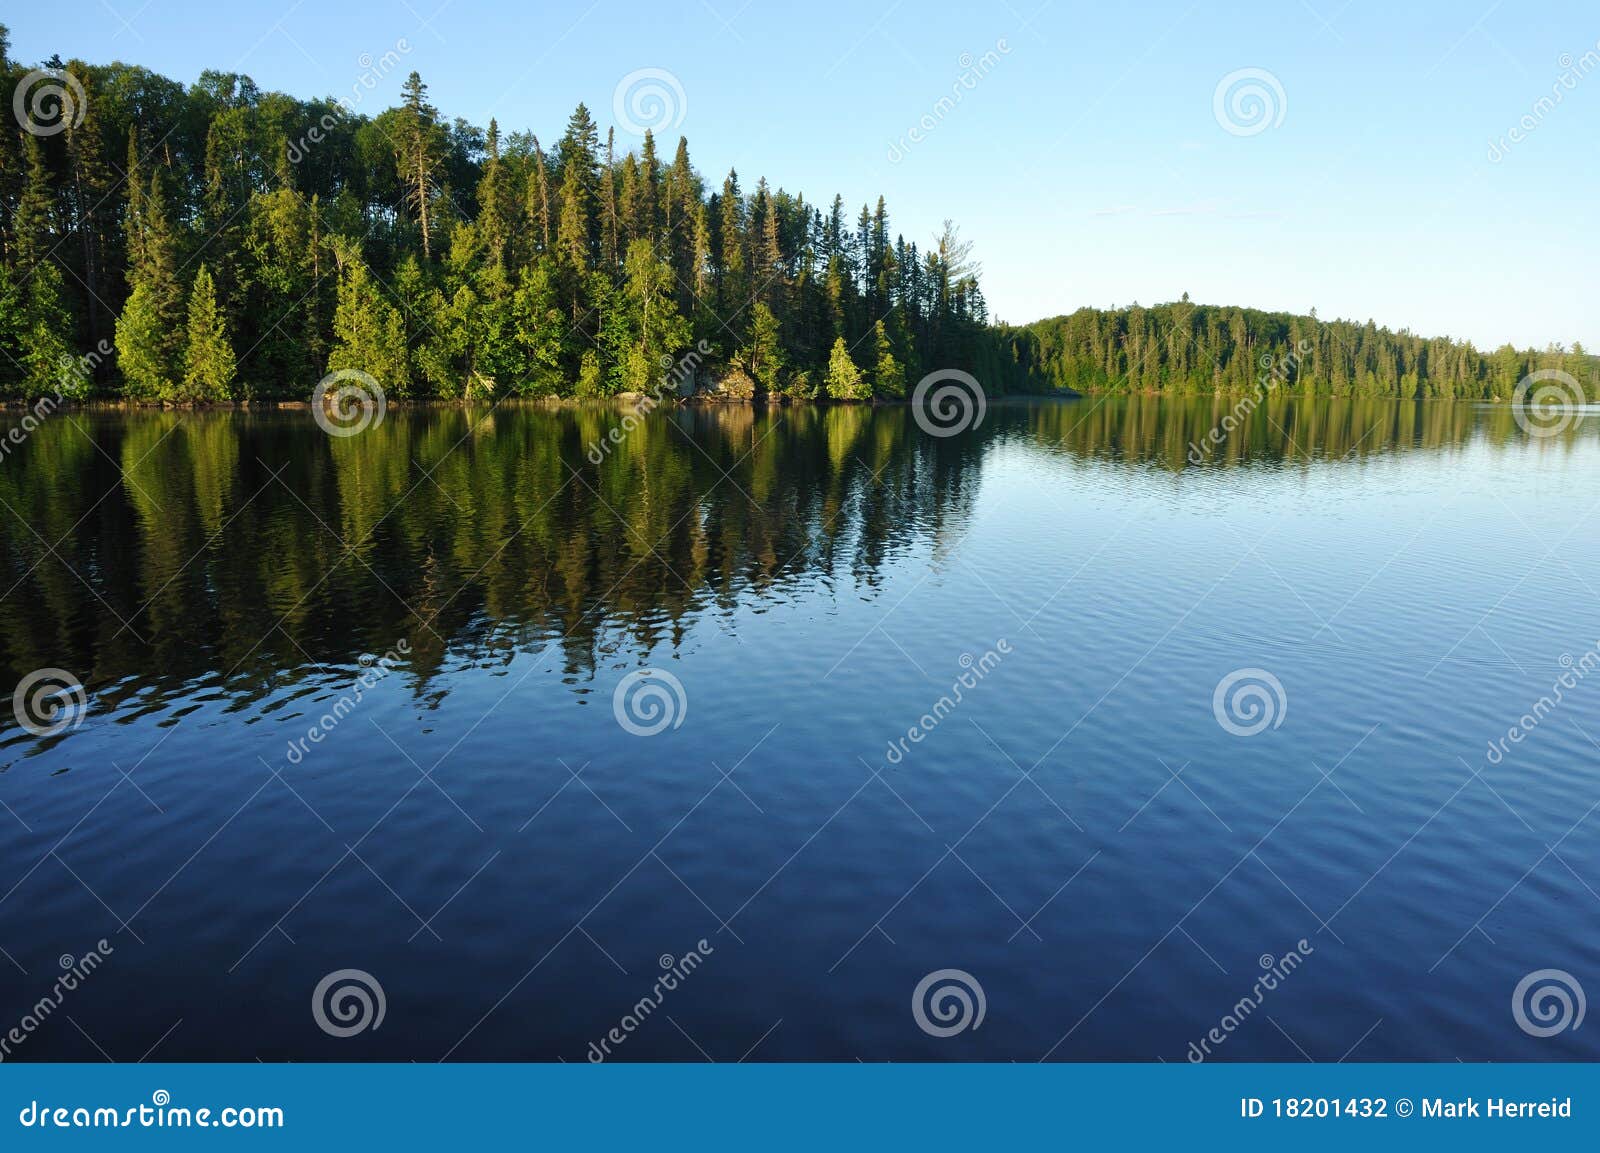 reflections on a wilderness lake